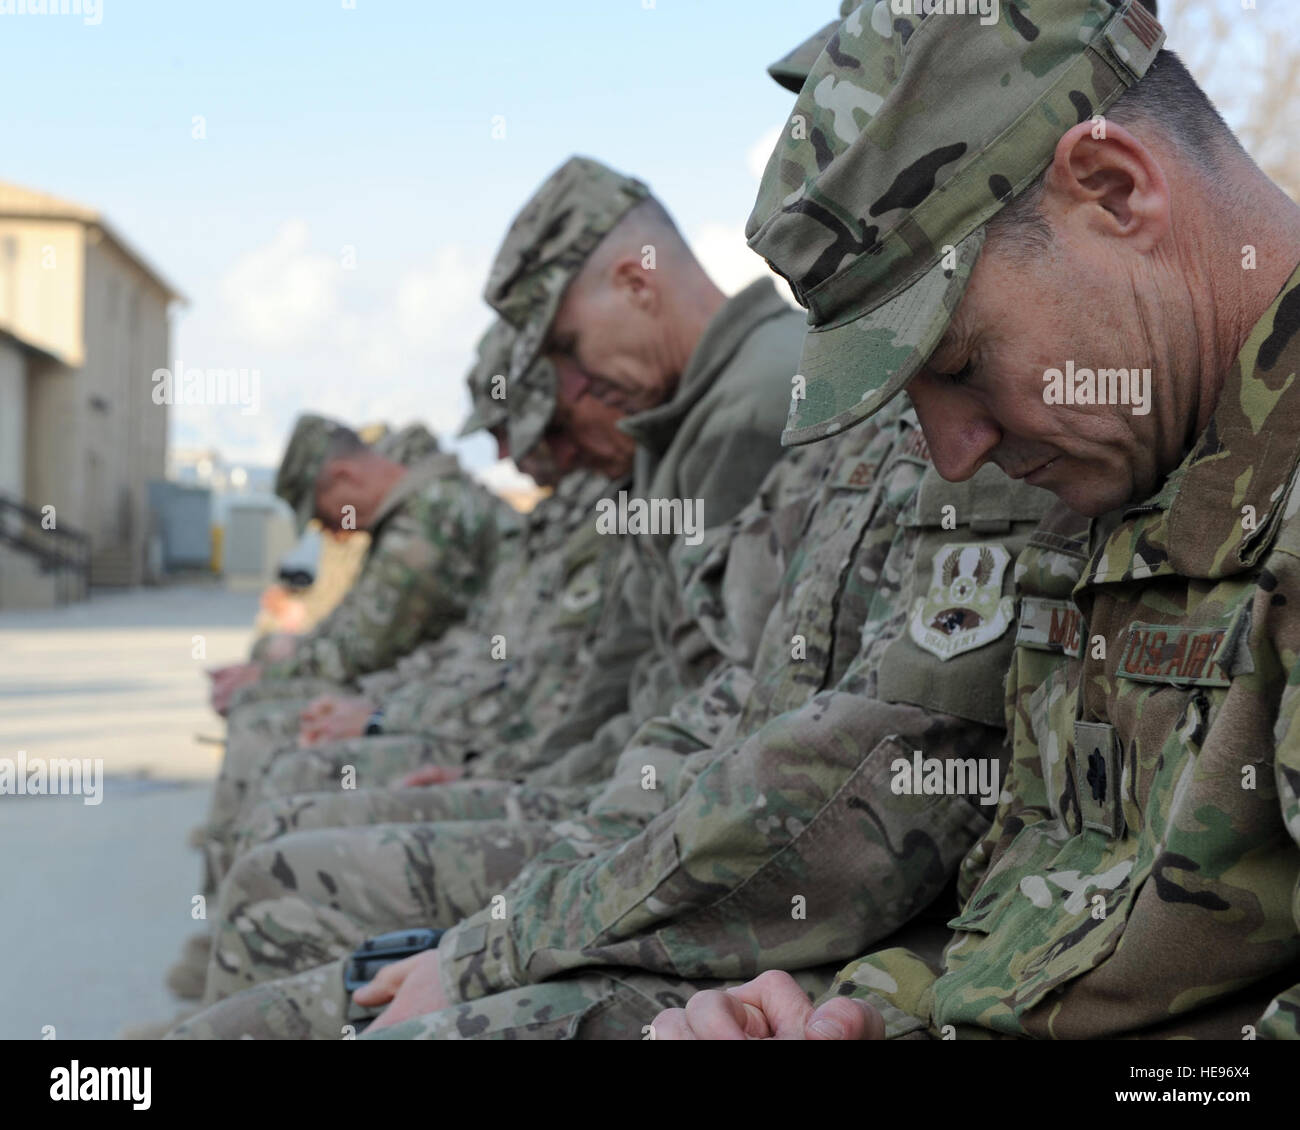 U.S. service members bow their heads during a remembrance ceremony honoring special operators who were killed March 4, 2002, during Operation Anaconda: U.S. Air Force Senior Airman Jason Cunningham, U.S. Army Cpl. Matthew Commons, U.S. Army Spc. Marc Anderson, U.S. Army Sgt. Phillip Svitak, U.S. Army Sgt. Bradley Crose, U.S. Navy Petty Officer 1st Class Neil Roberts and U.S. Air Force Tech. Sgt. John Chapman, March 3, 2015 at Bagram Air Field, Afghanistan. Service members from all branches conducted a 24-hour vigil run and a retreat ceremony to honor the 13th anniversary of their deaths and pa Stock Photo